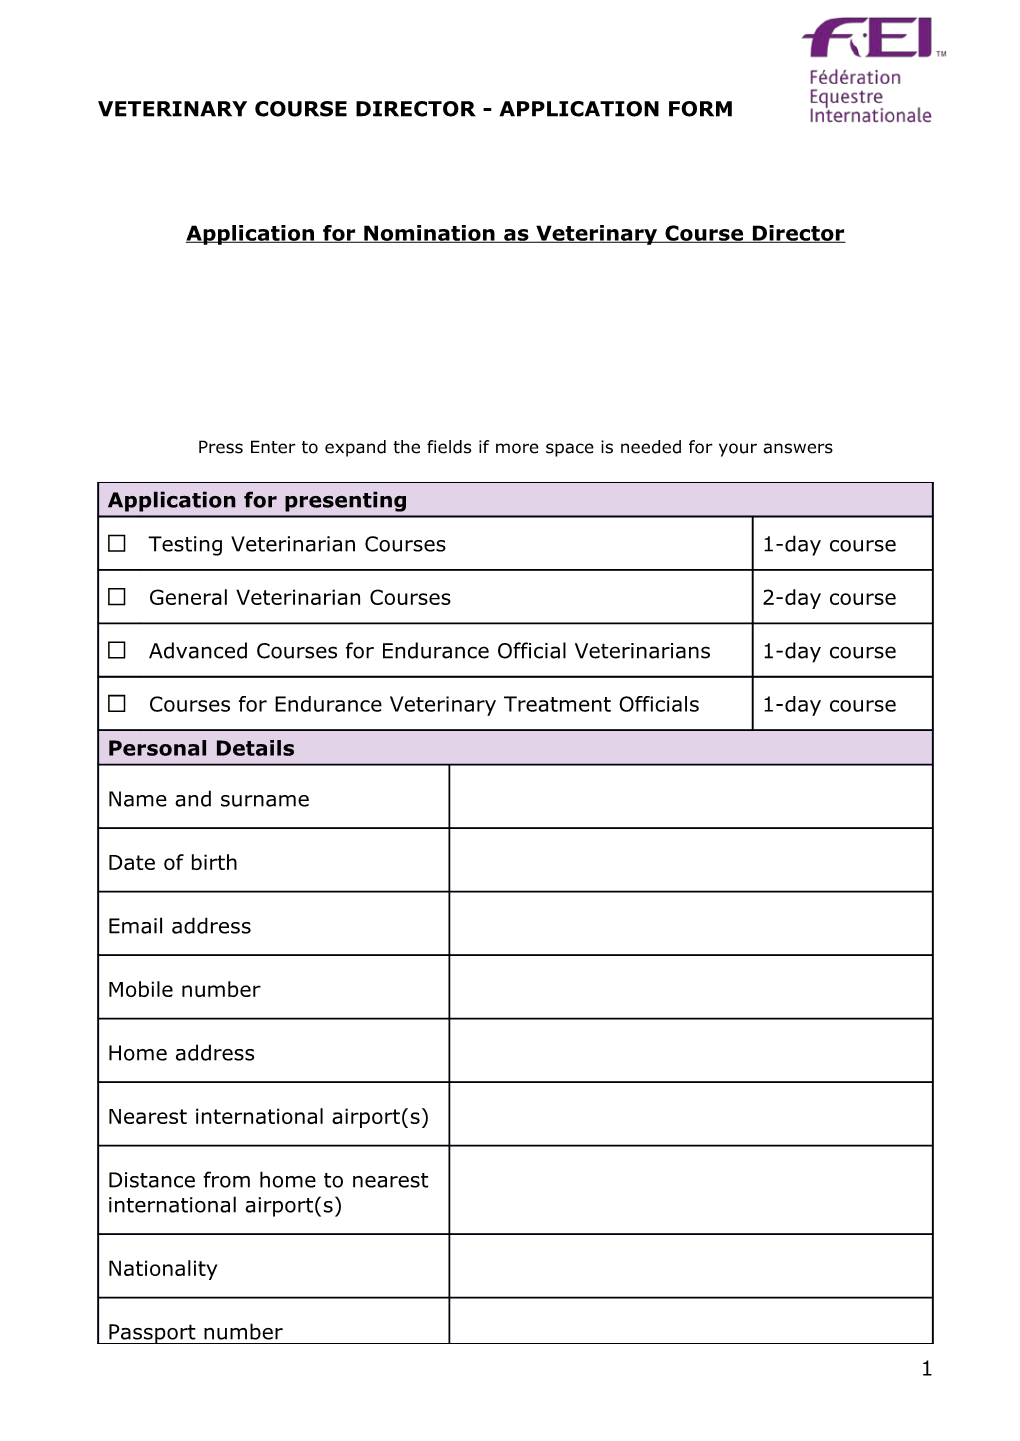 Application for Nomination As Veterinary Course Director